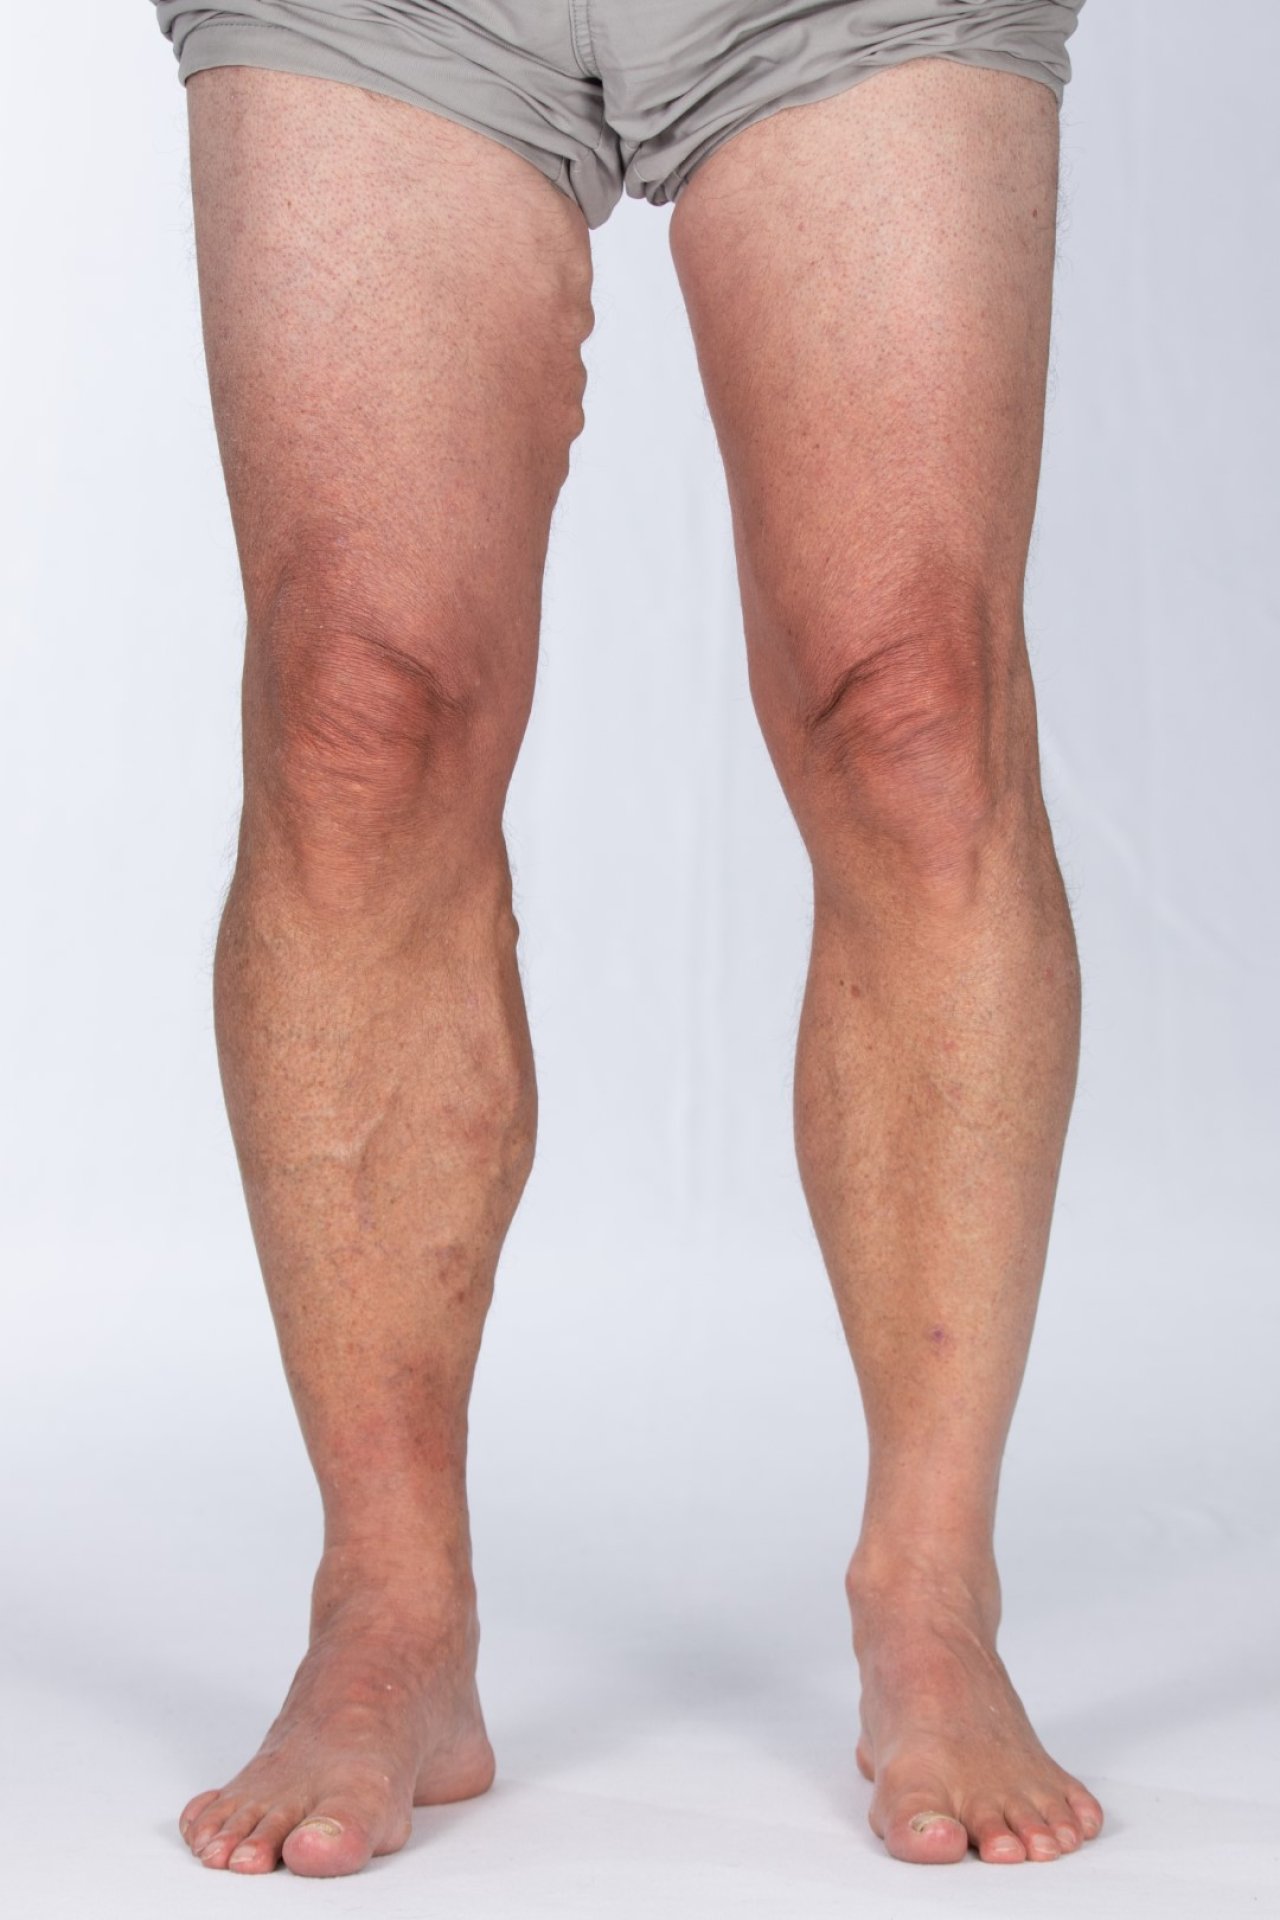 https://lrselfcare.co.uk/img/containers/assets/conditions/varicose-veins.jpg/a16e00a6d6513e026d59caca2c0b8a79.jpg